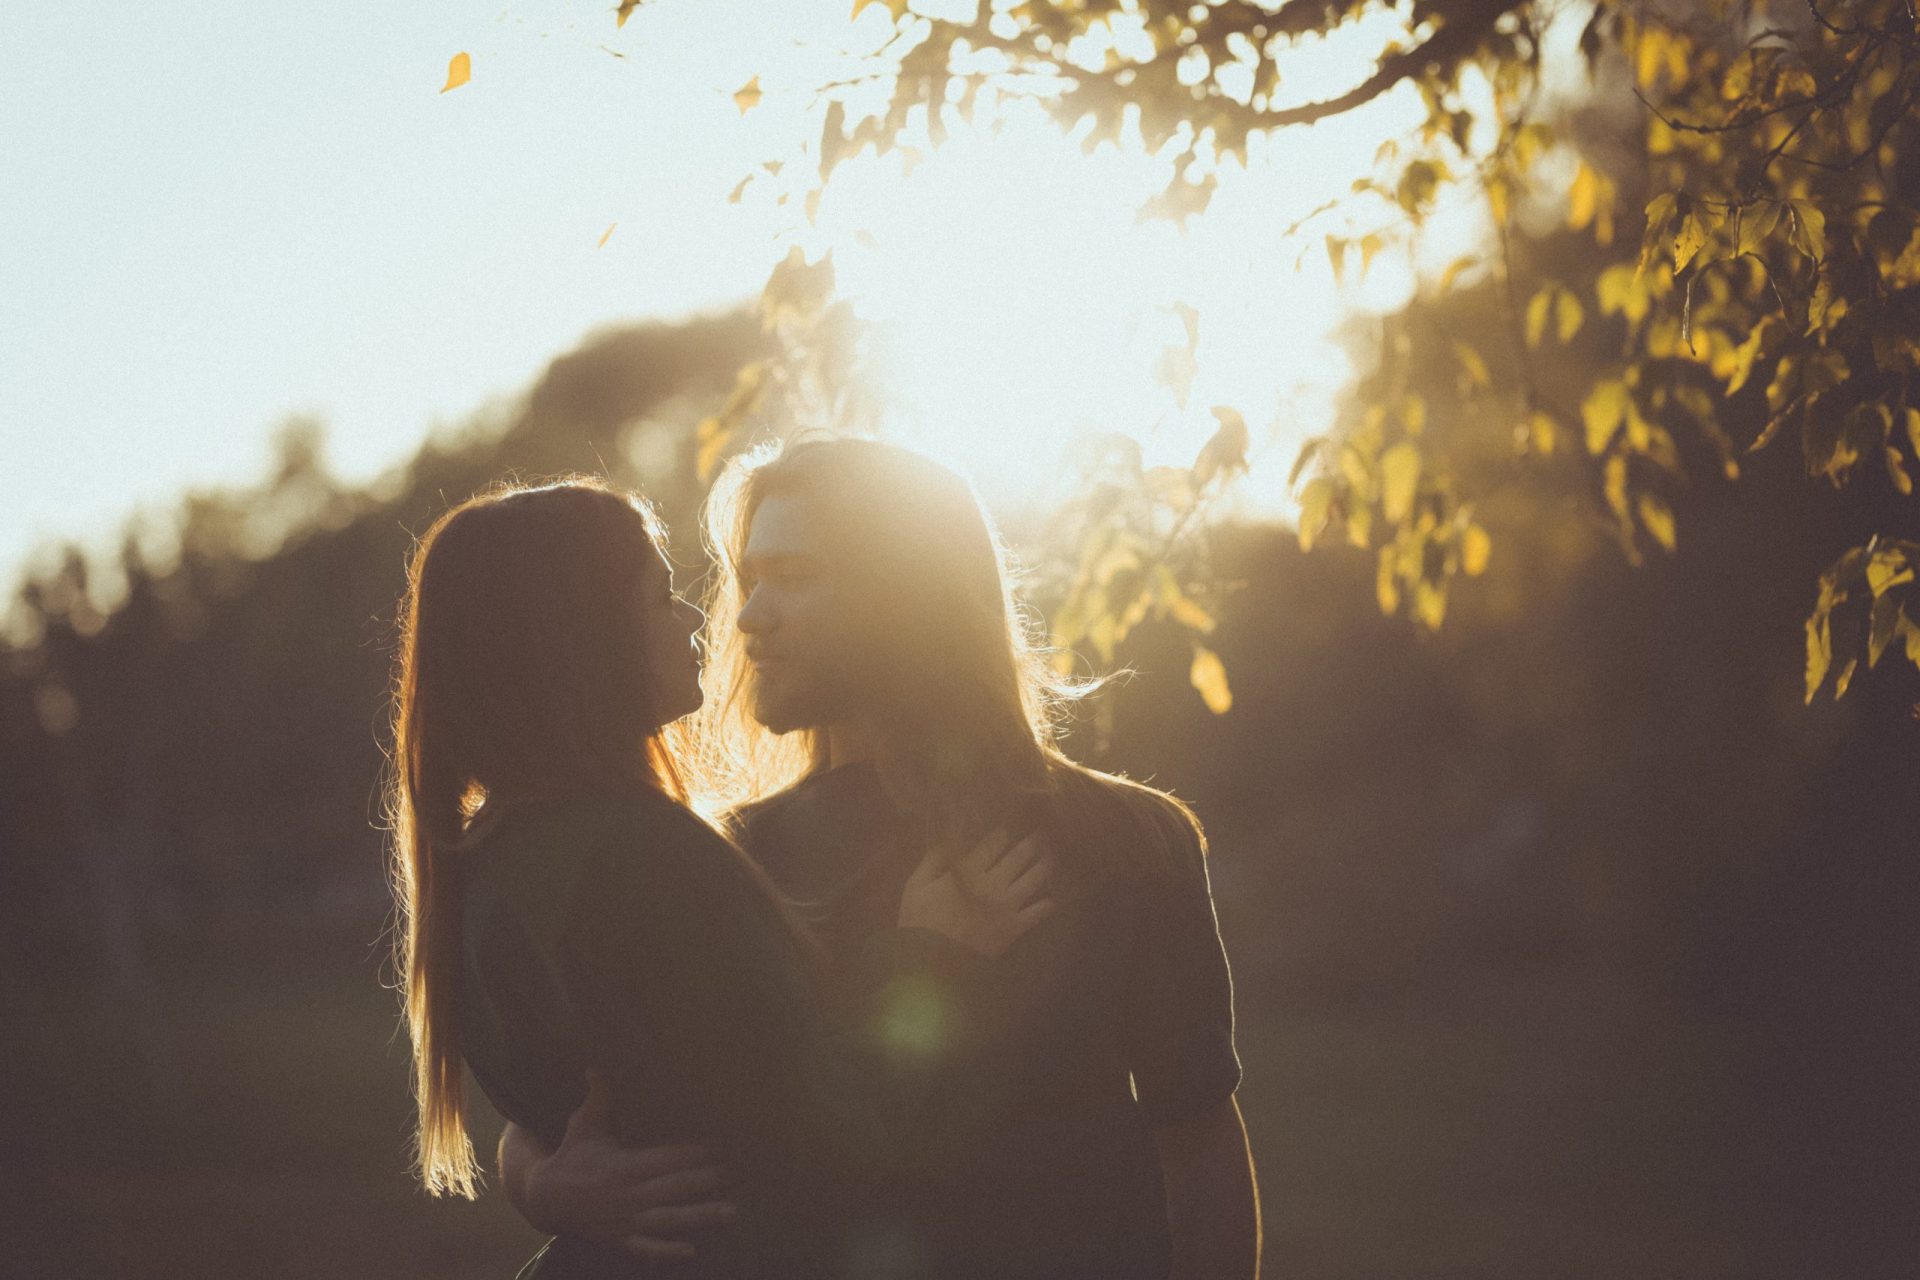 33 Unromantic ‘How Couples First Met’ Stories That Weirdly Worked Out